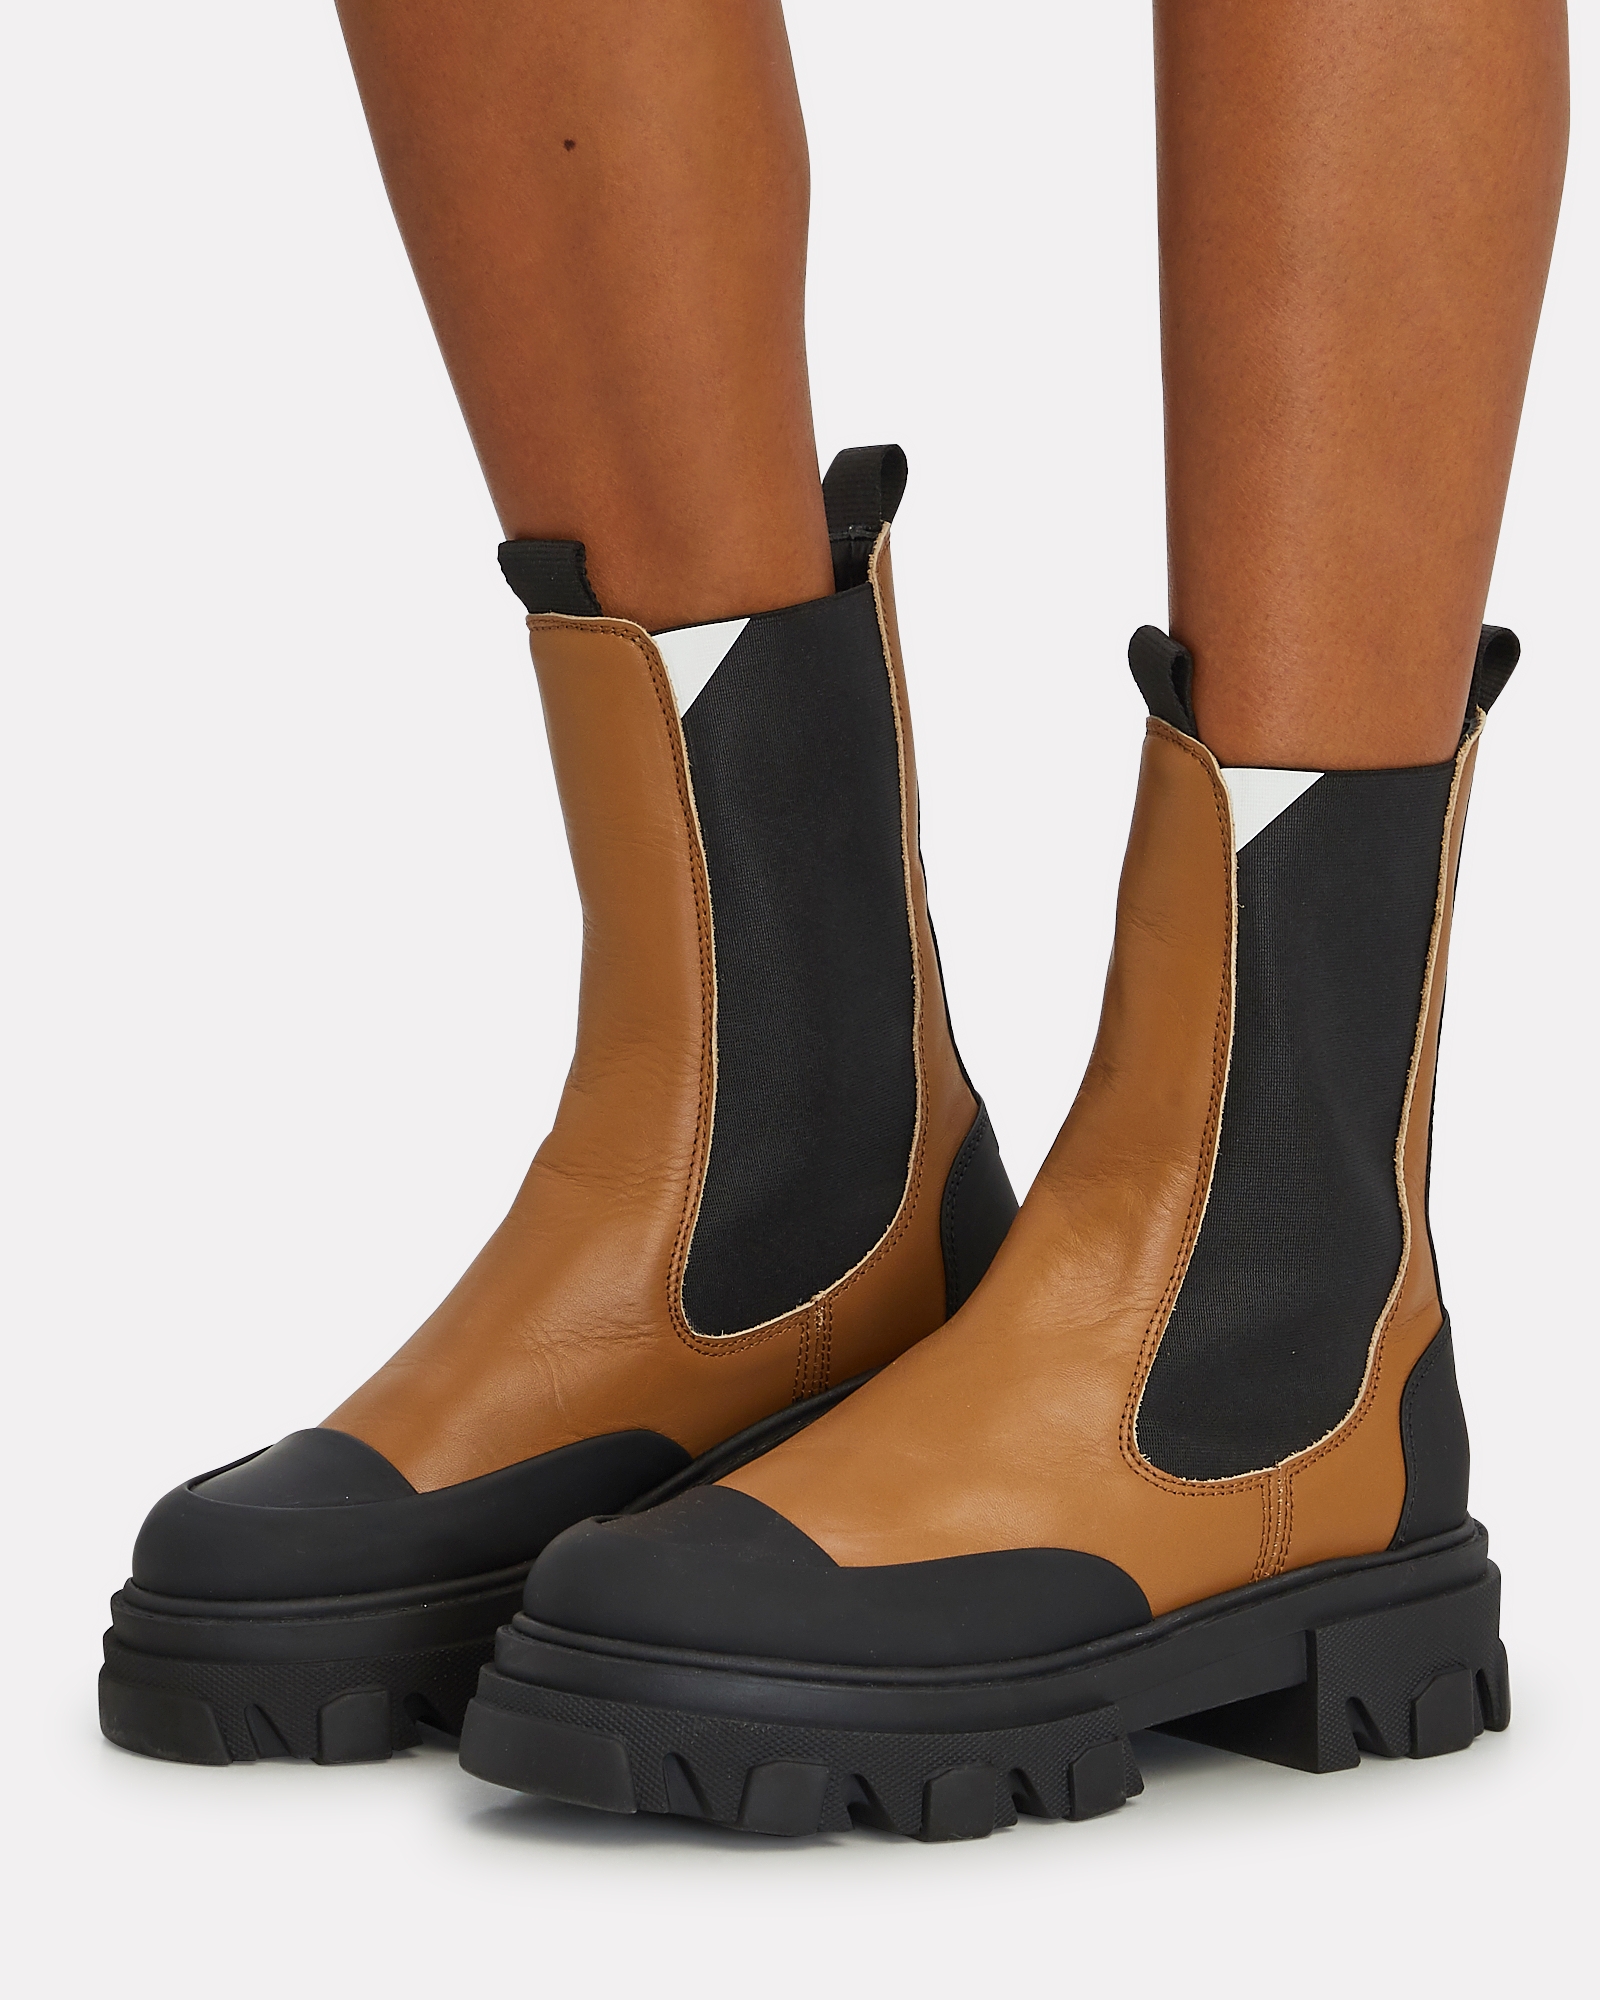 GANNI Tall Leather Chelsea Boots | INTERMIX®